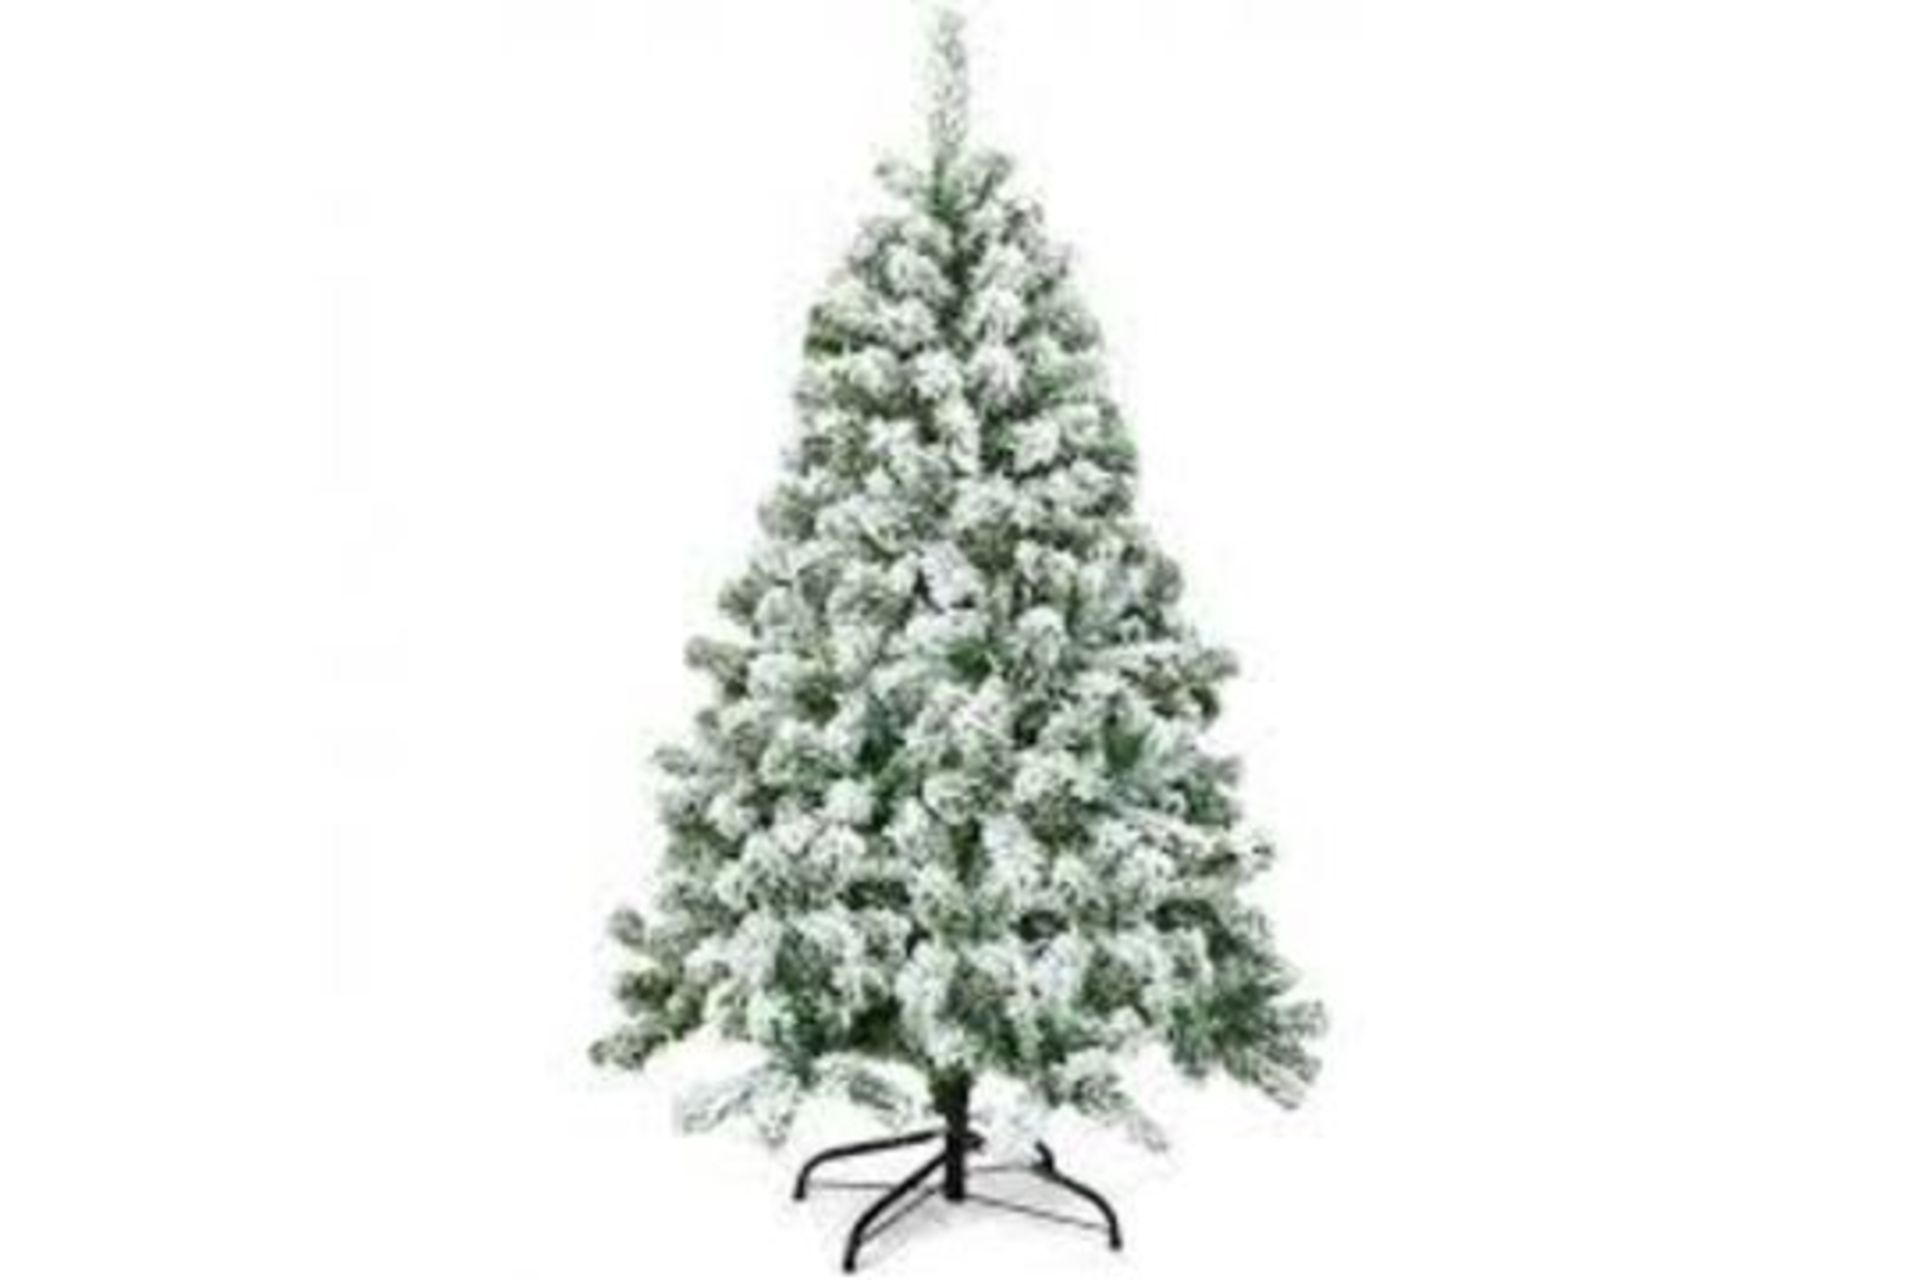 4.5ft Snow Flocked Hinged Pine Foldable Christmas Tree. - R13.15. The tree, crafted with 400 snow